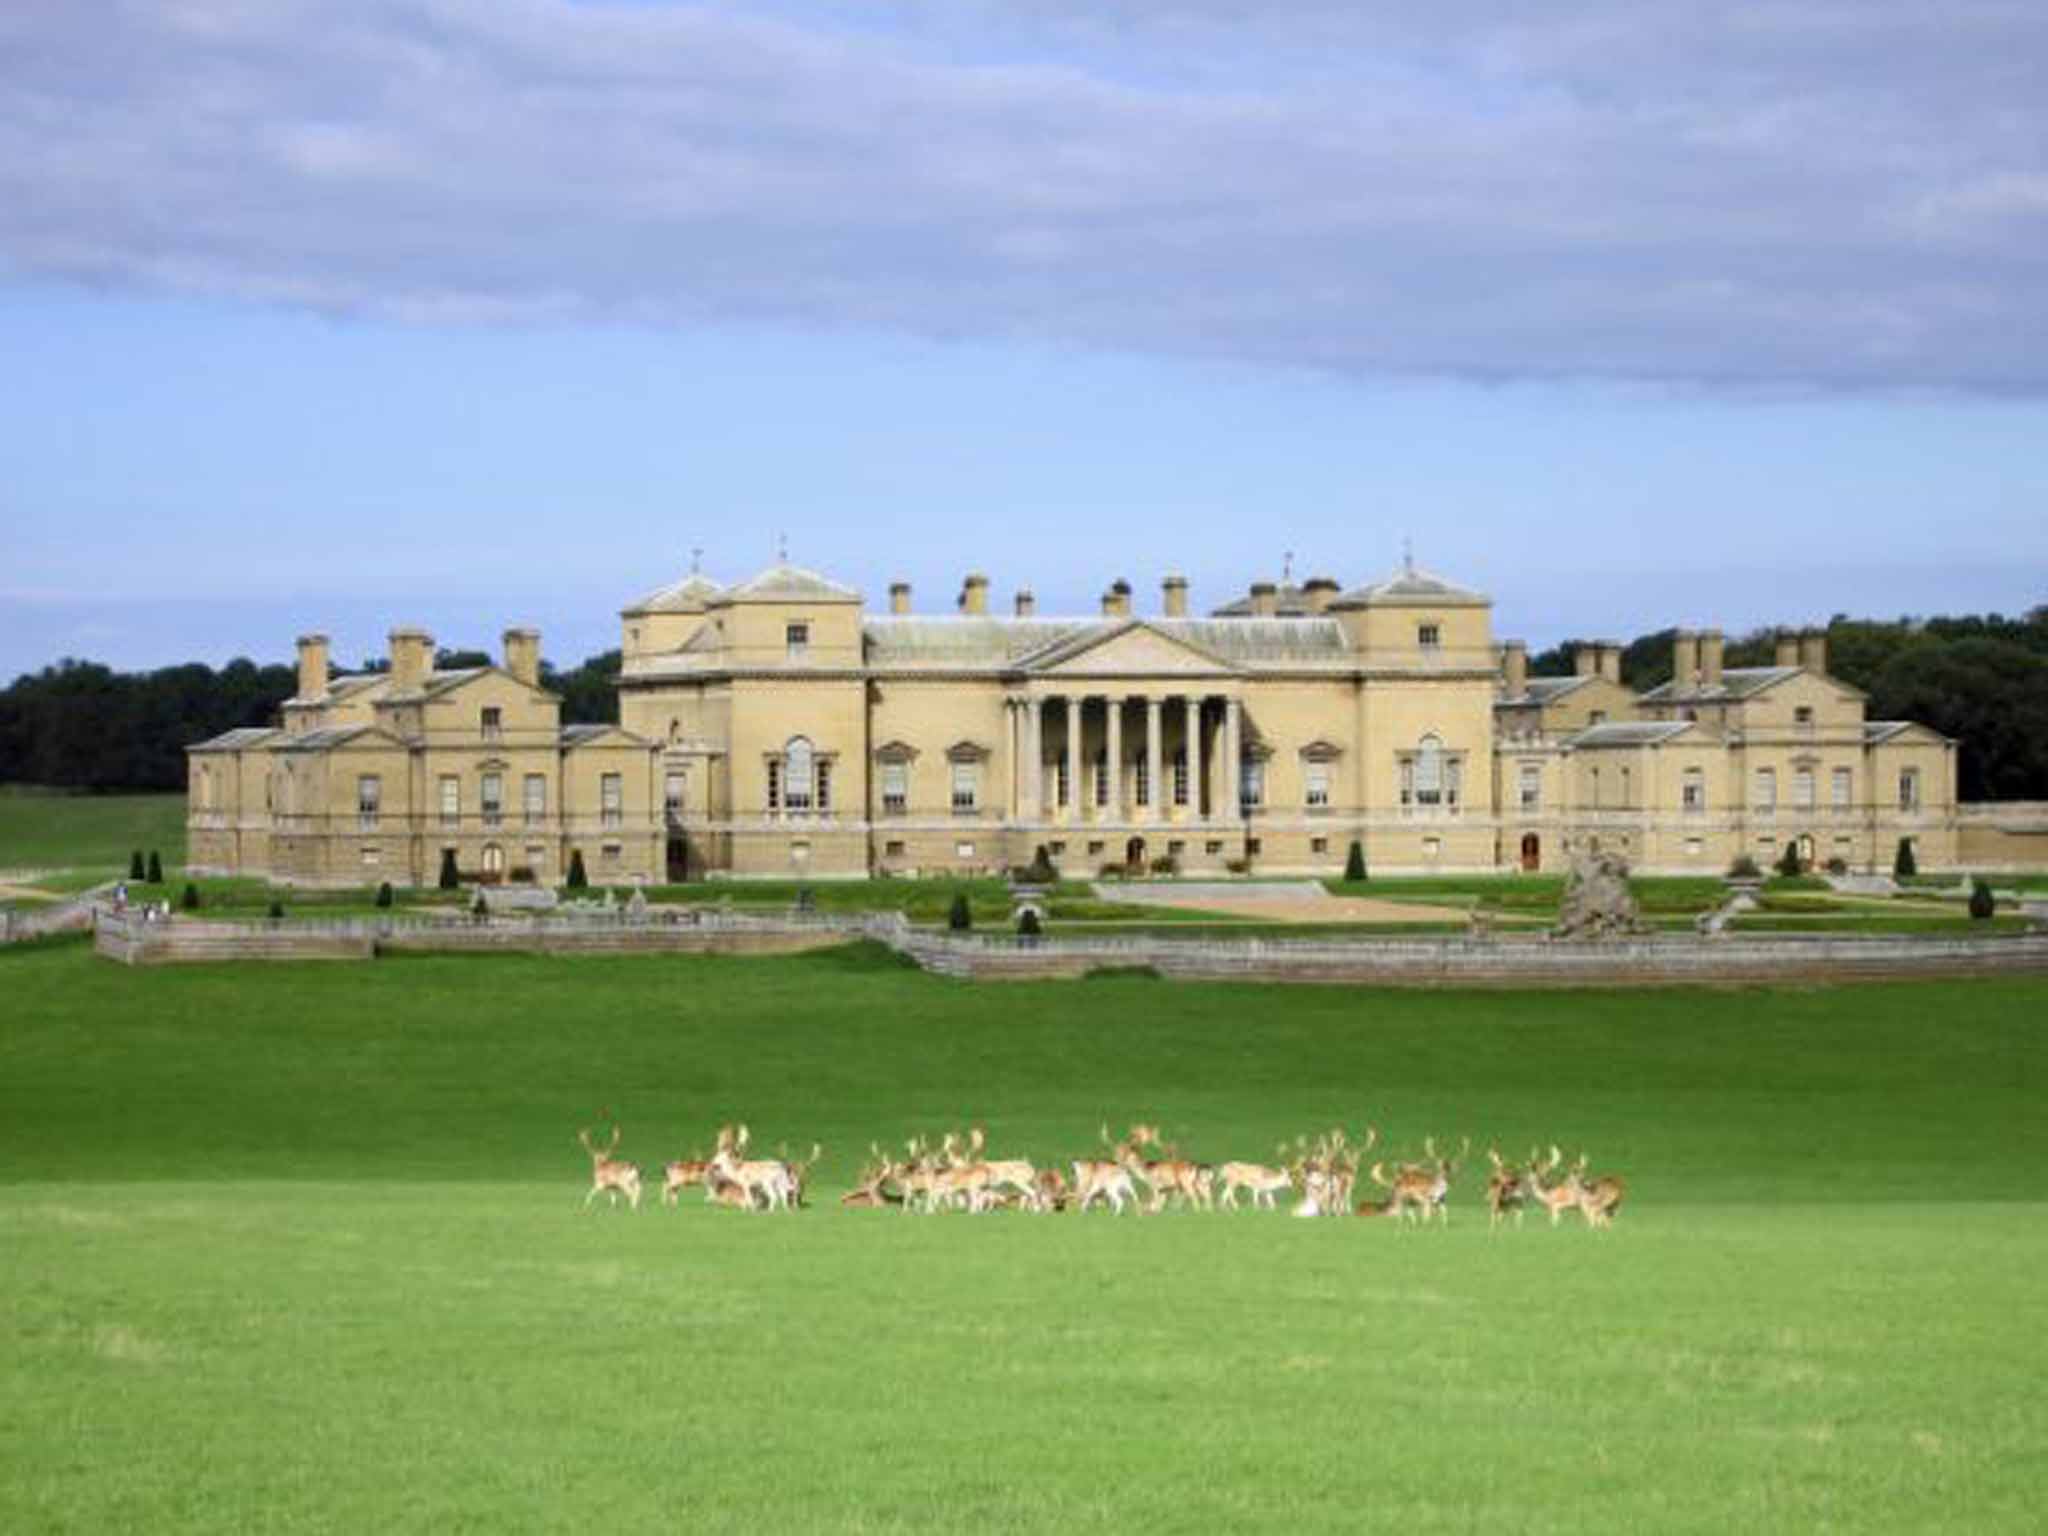 Following the herd: Deer in the grounds of Holkham Hall